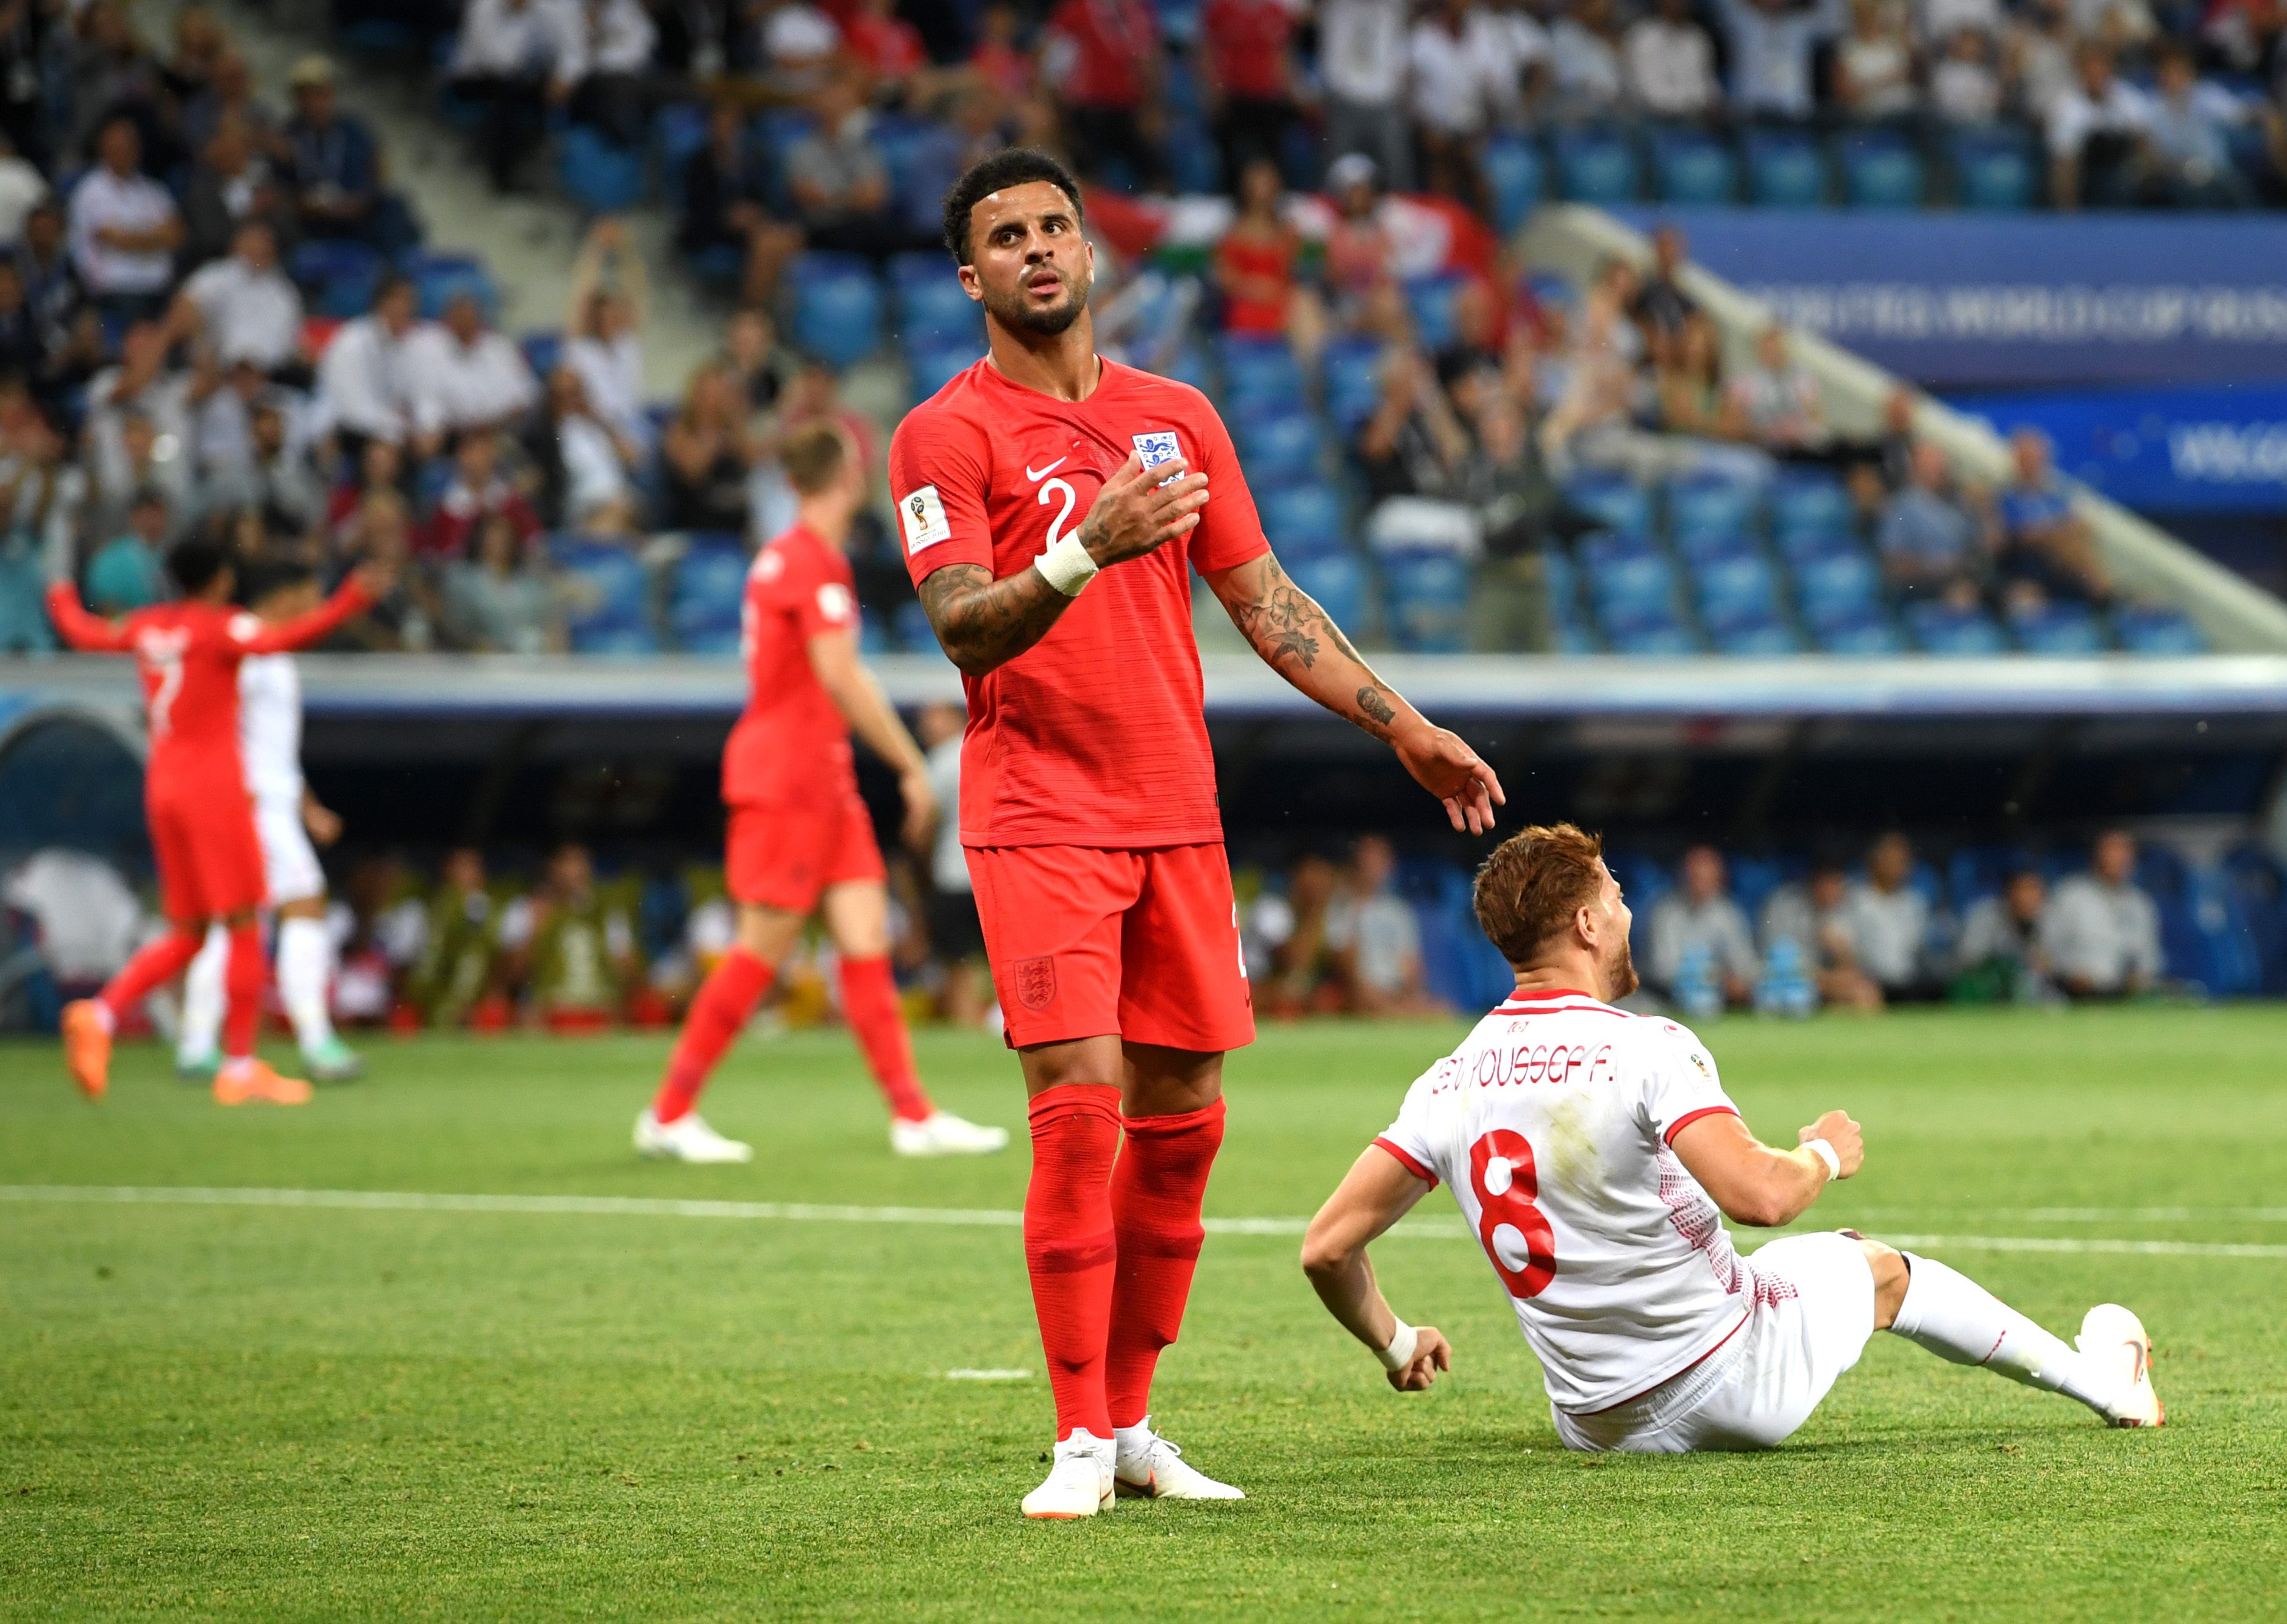 Kyle Walker is suspended (Photo by Matthias Hangst/Getty Images)